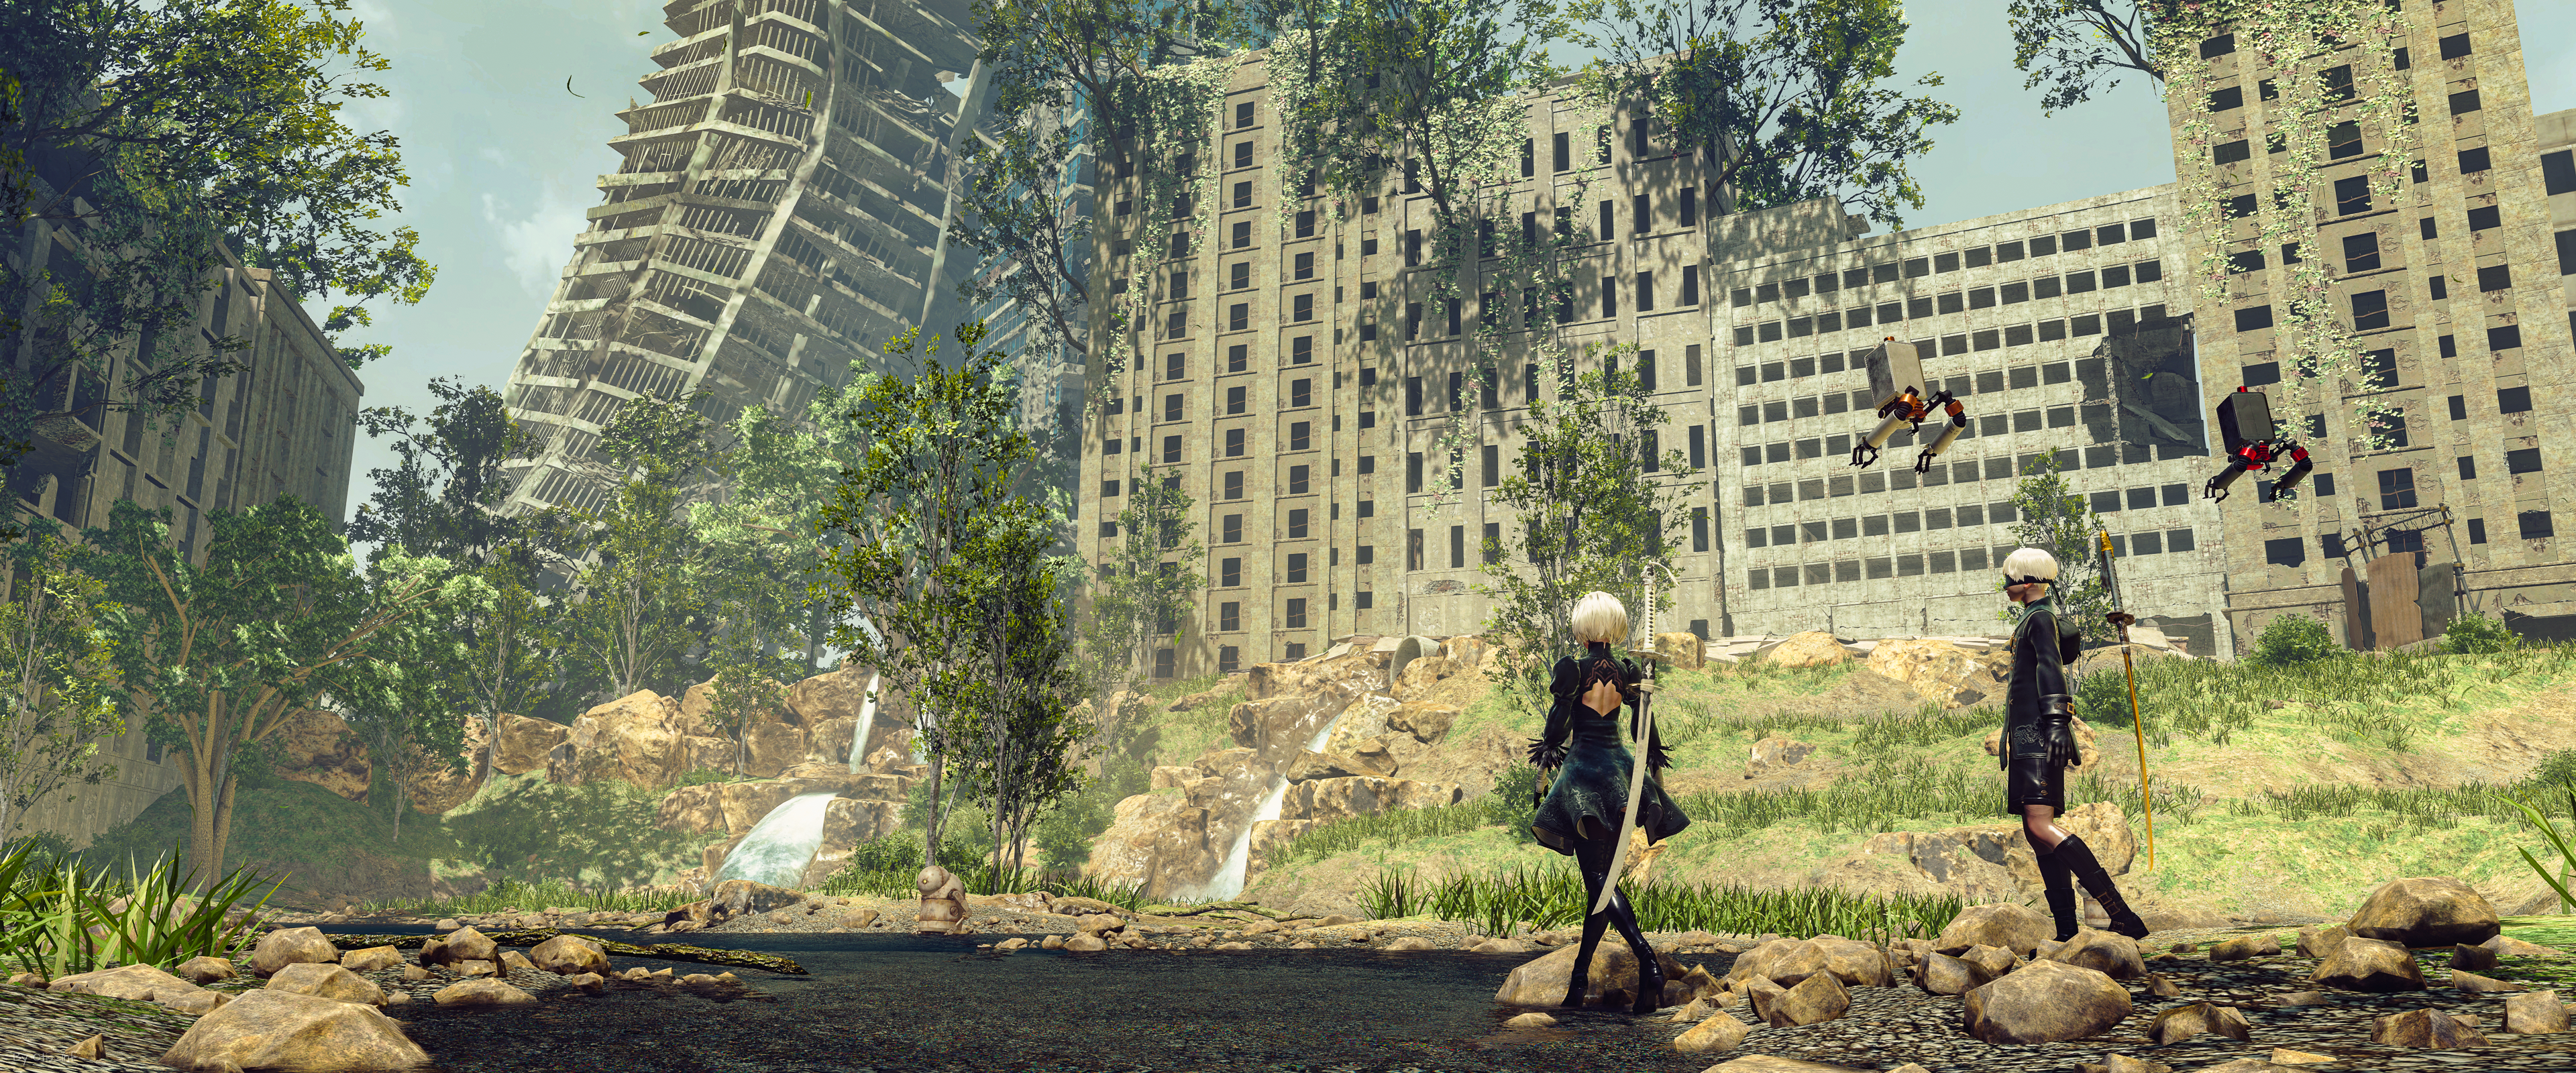 Orkaan Staan voor En Frans Bouma, Virtual and Real Life Photography - NieR: Automata